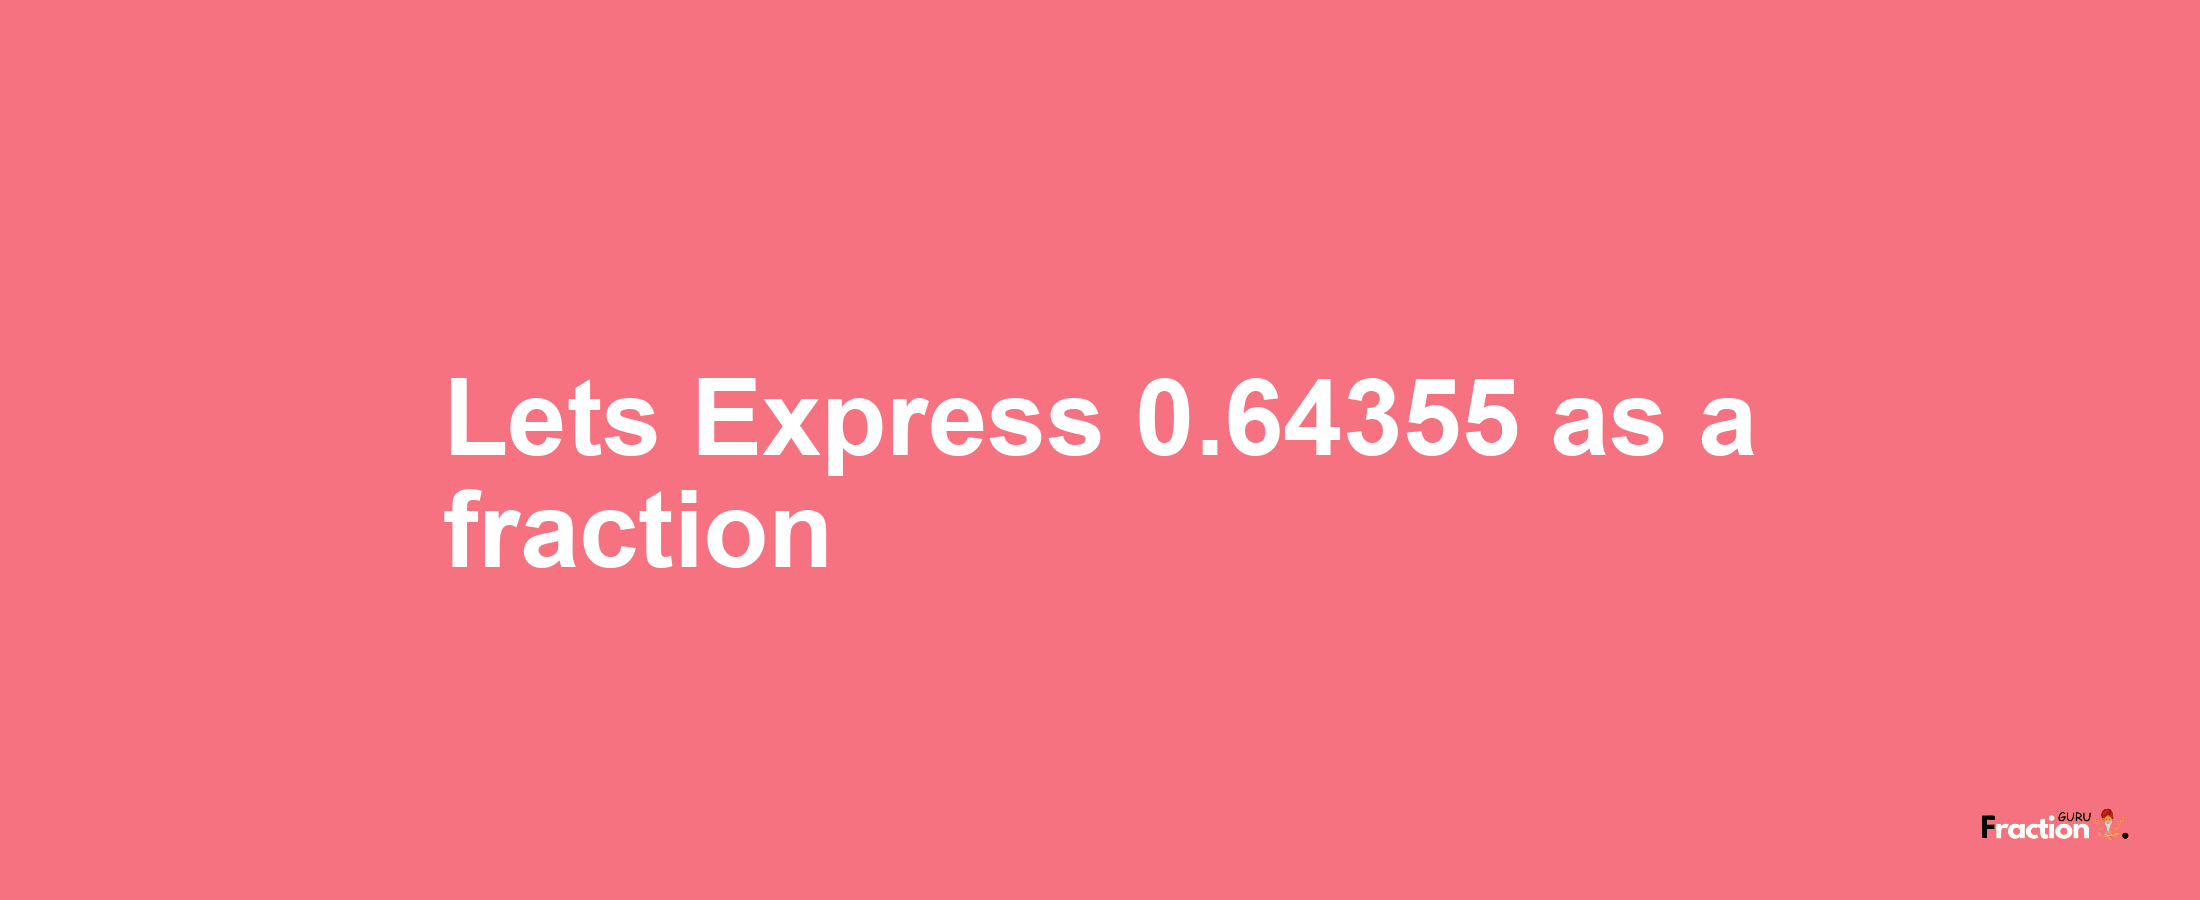 Lets Express 0.64355 as afraction